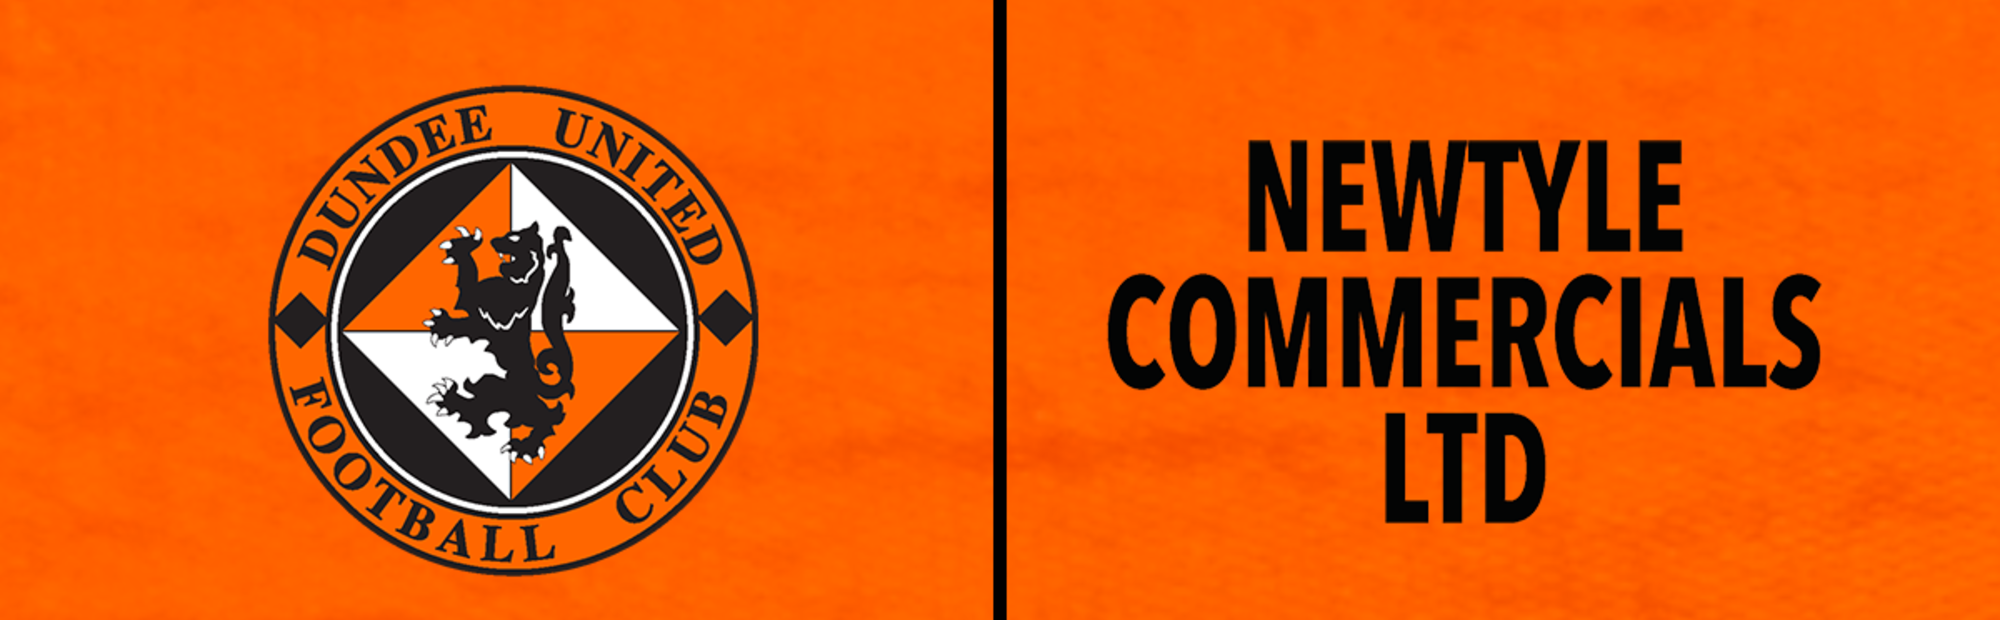 Dundee United and Newtyle Commercials Ltd 